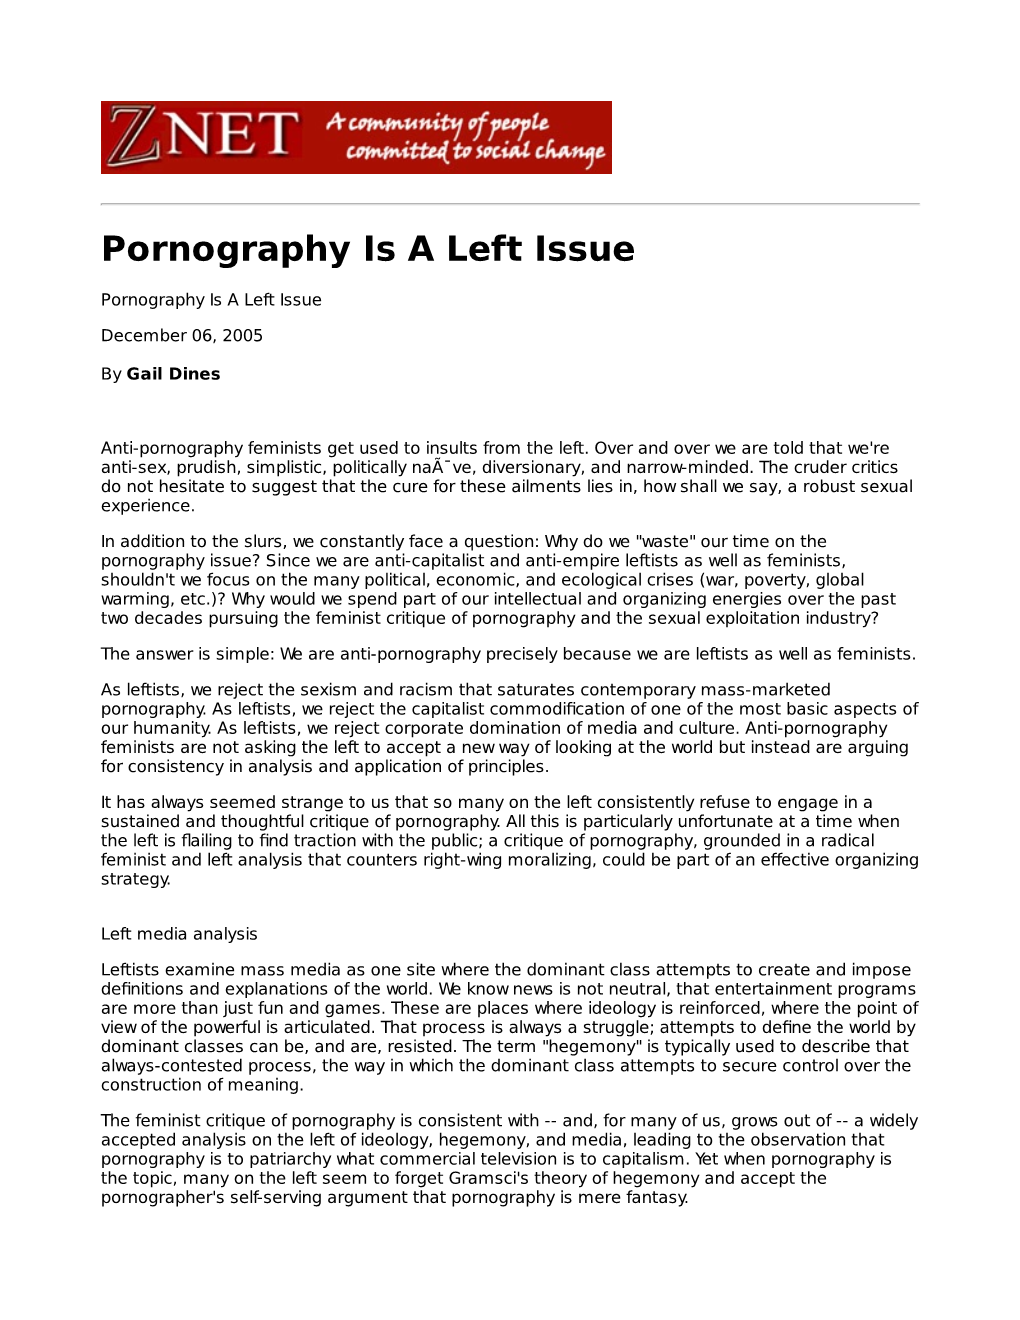 Pornography Is a Left Issue